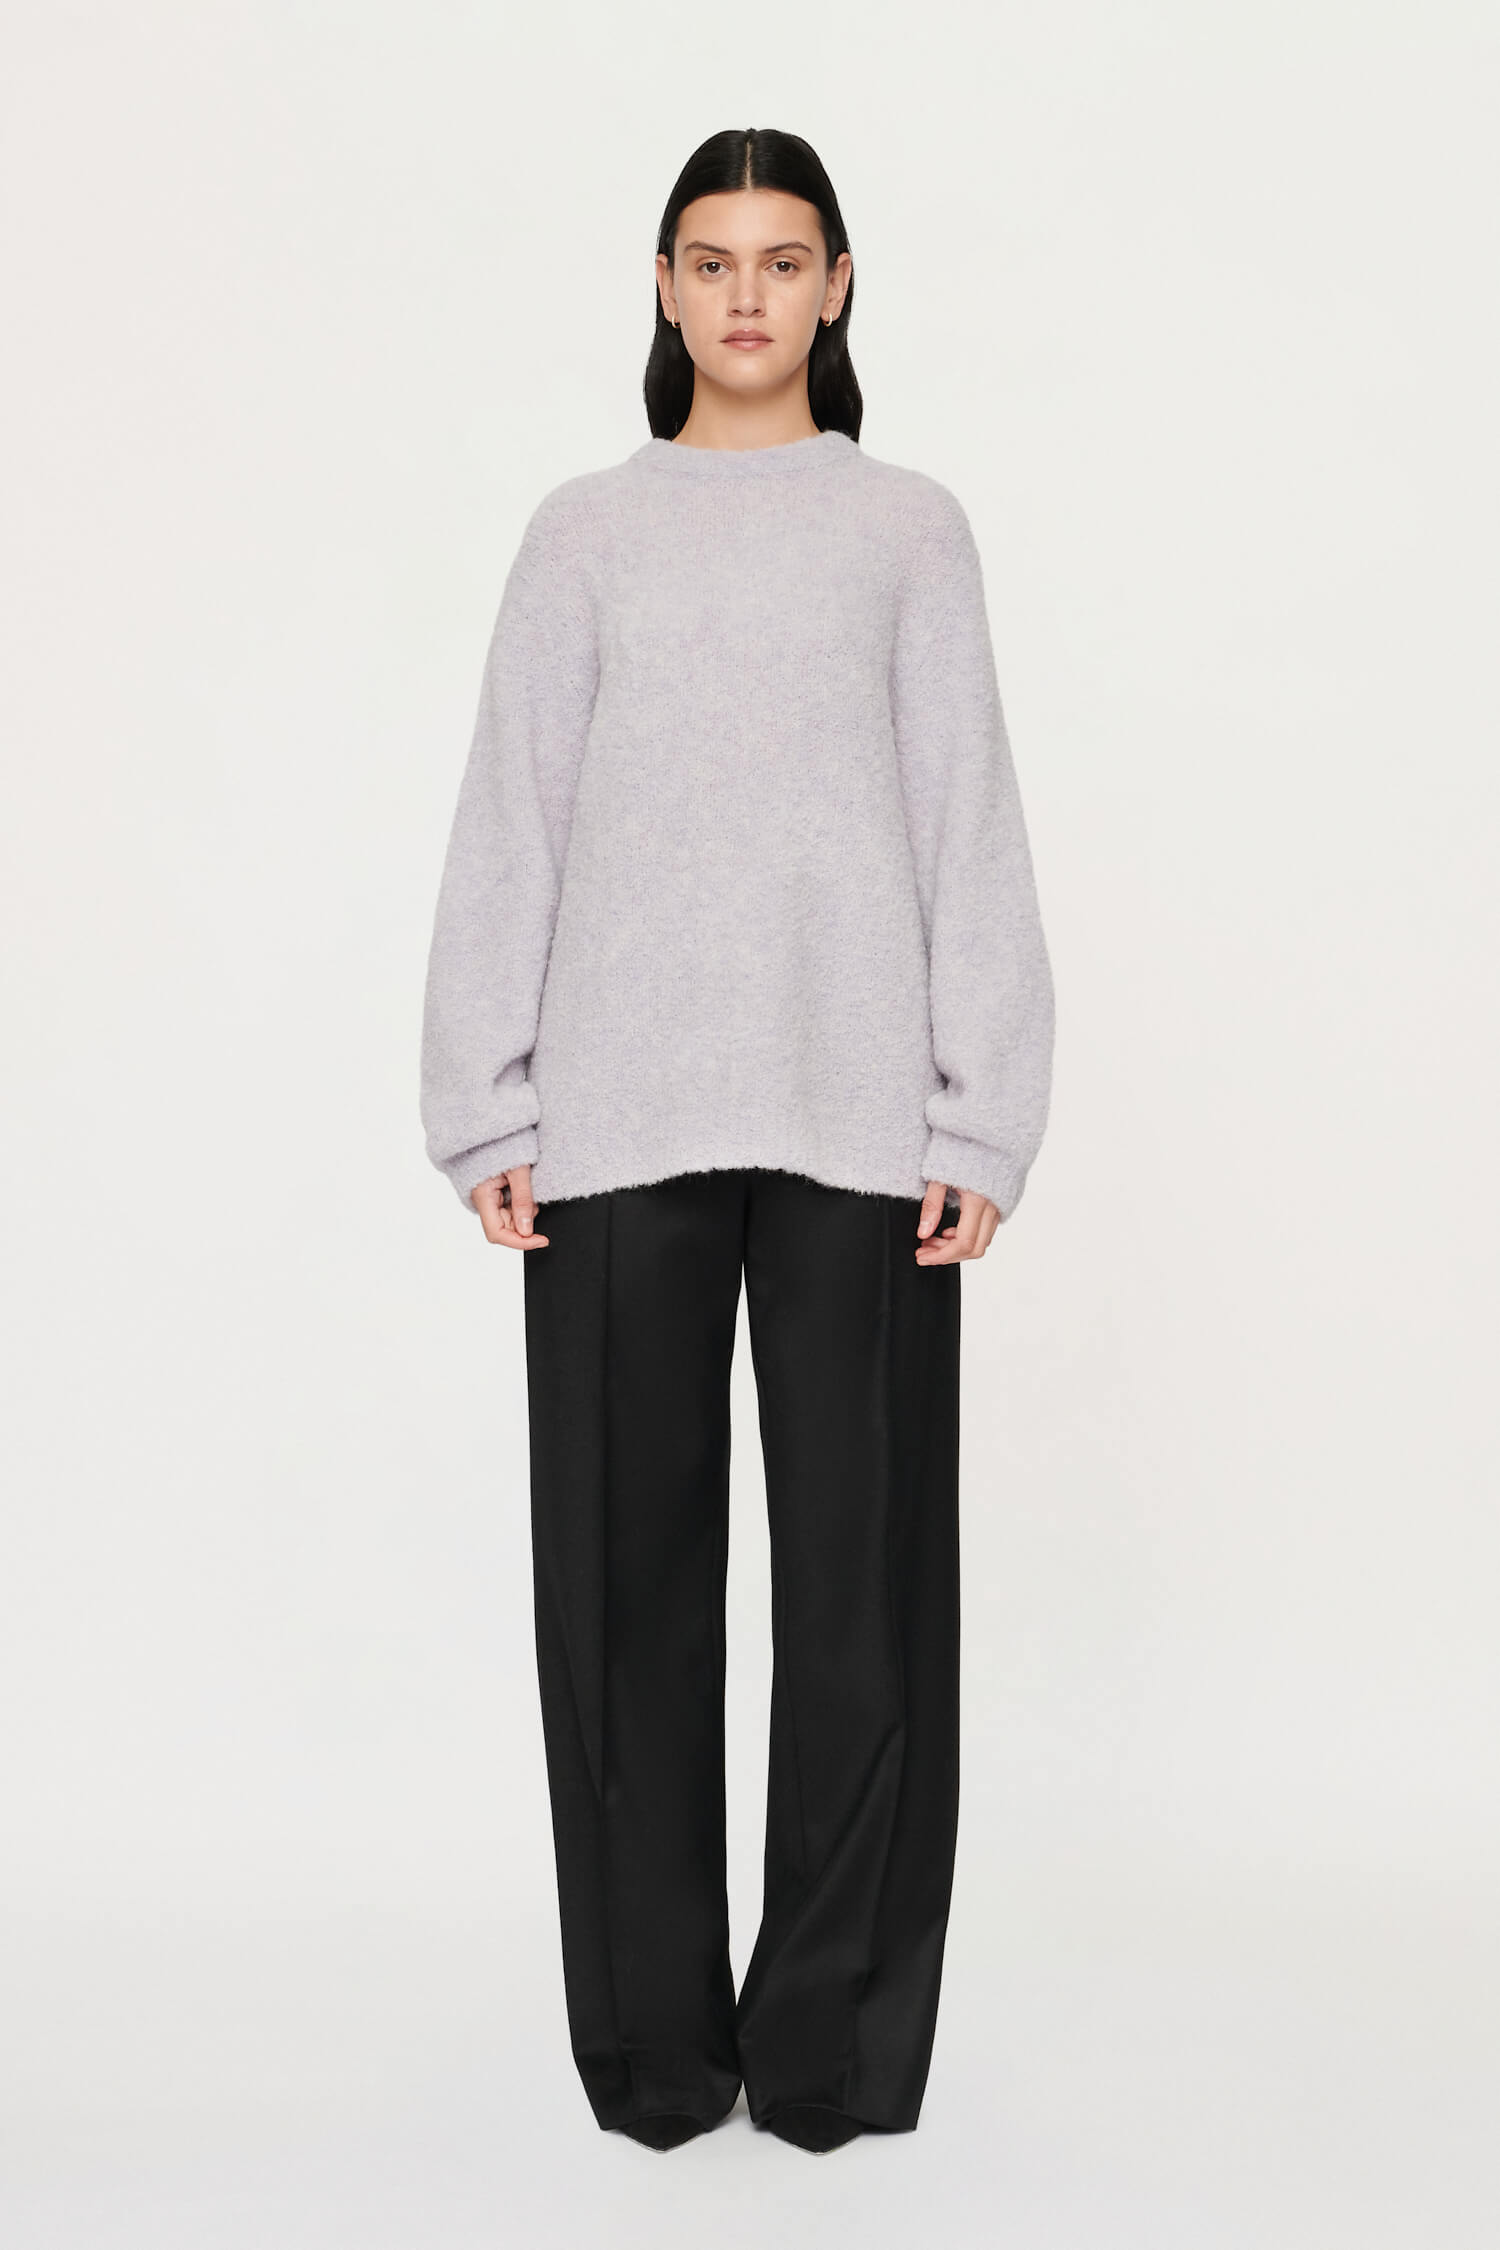 Clea Arlo Boucle Knit in Wisteria available at TNT The New Trend Australia.